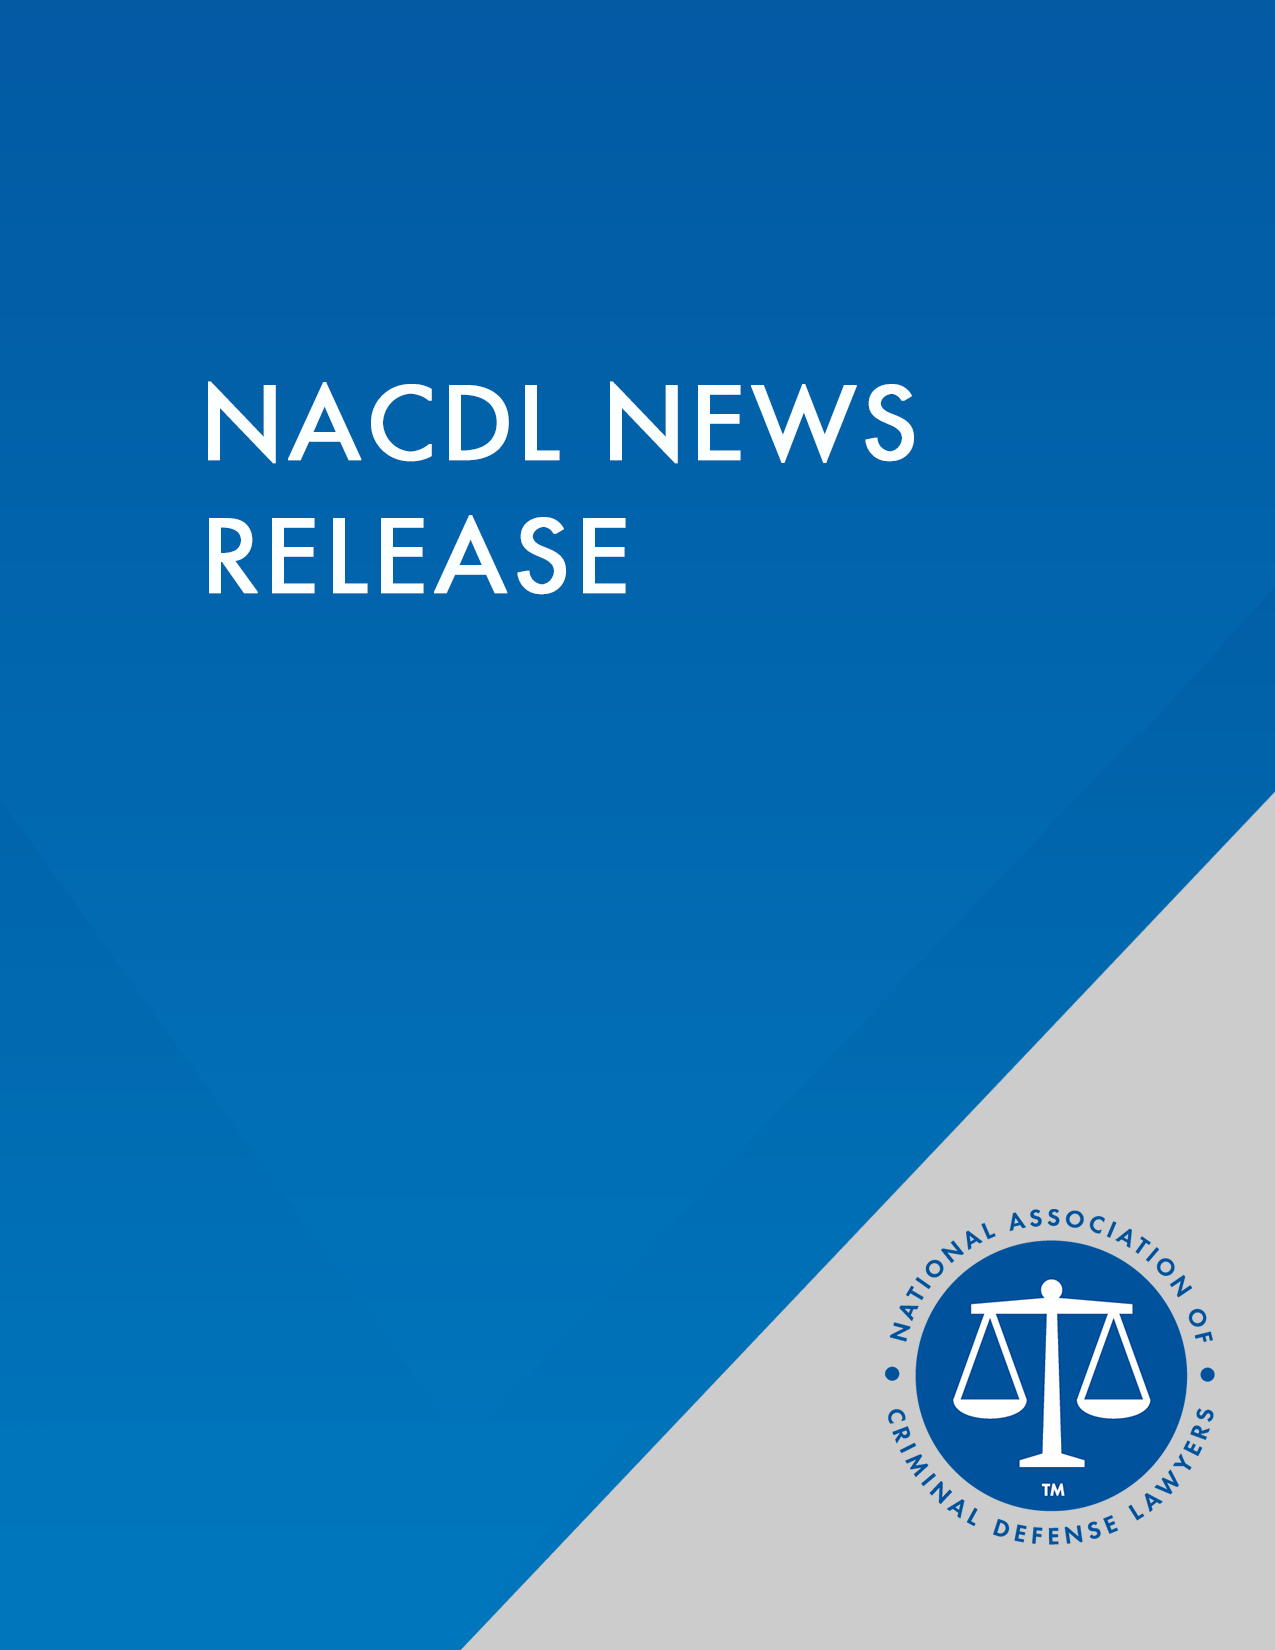 NACDL news release graphic